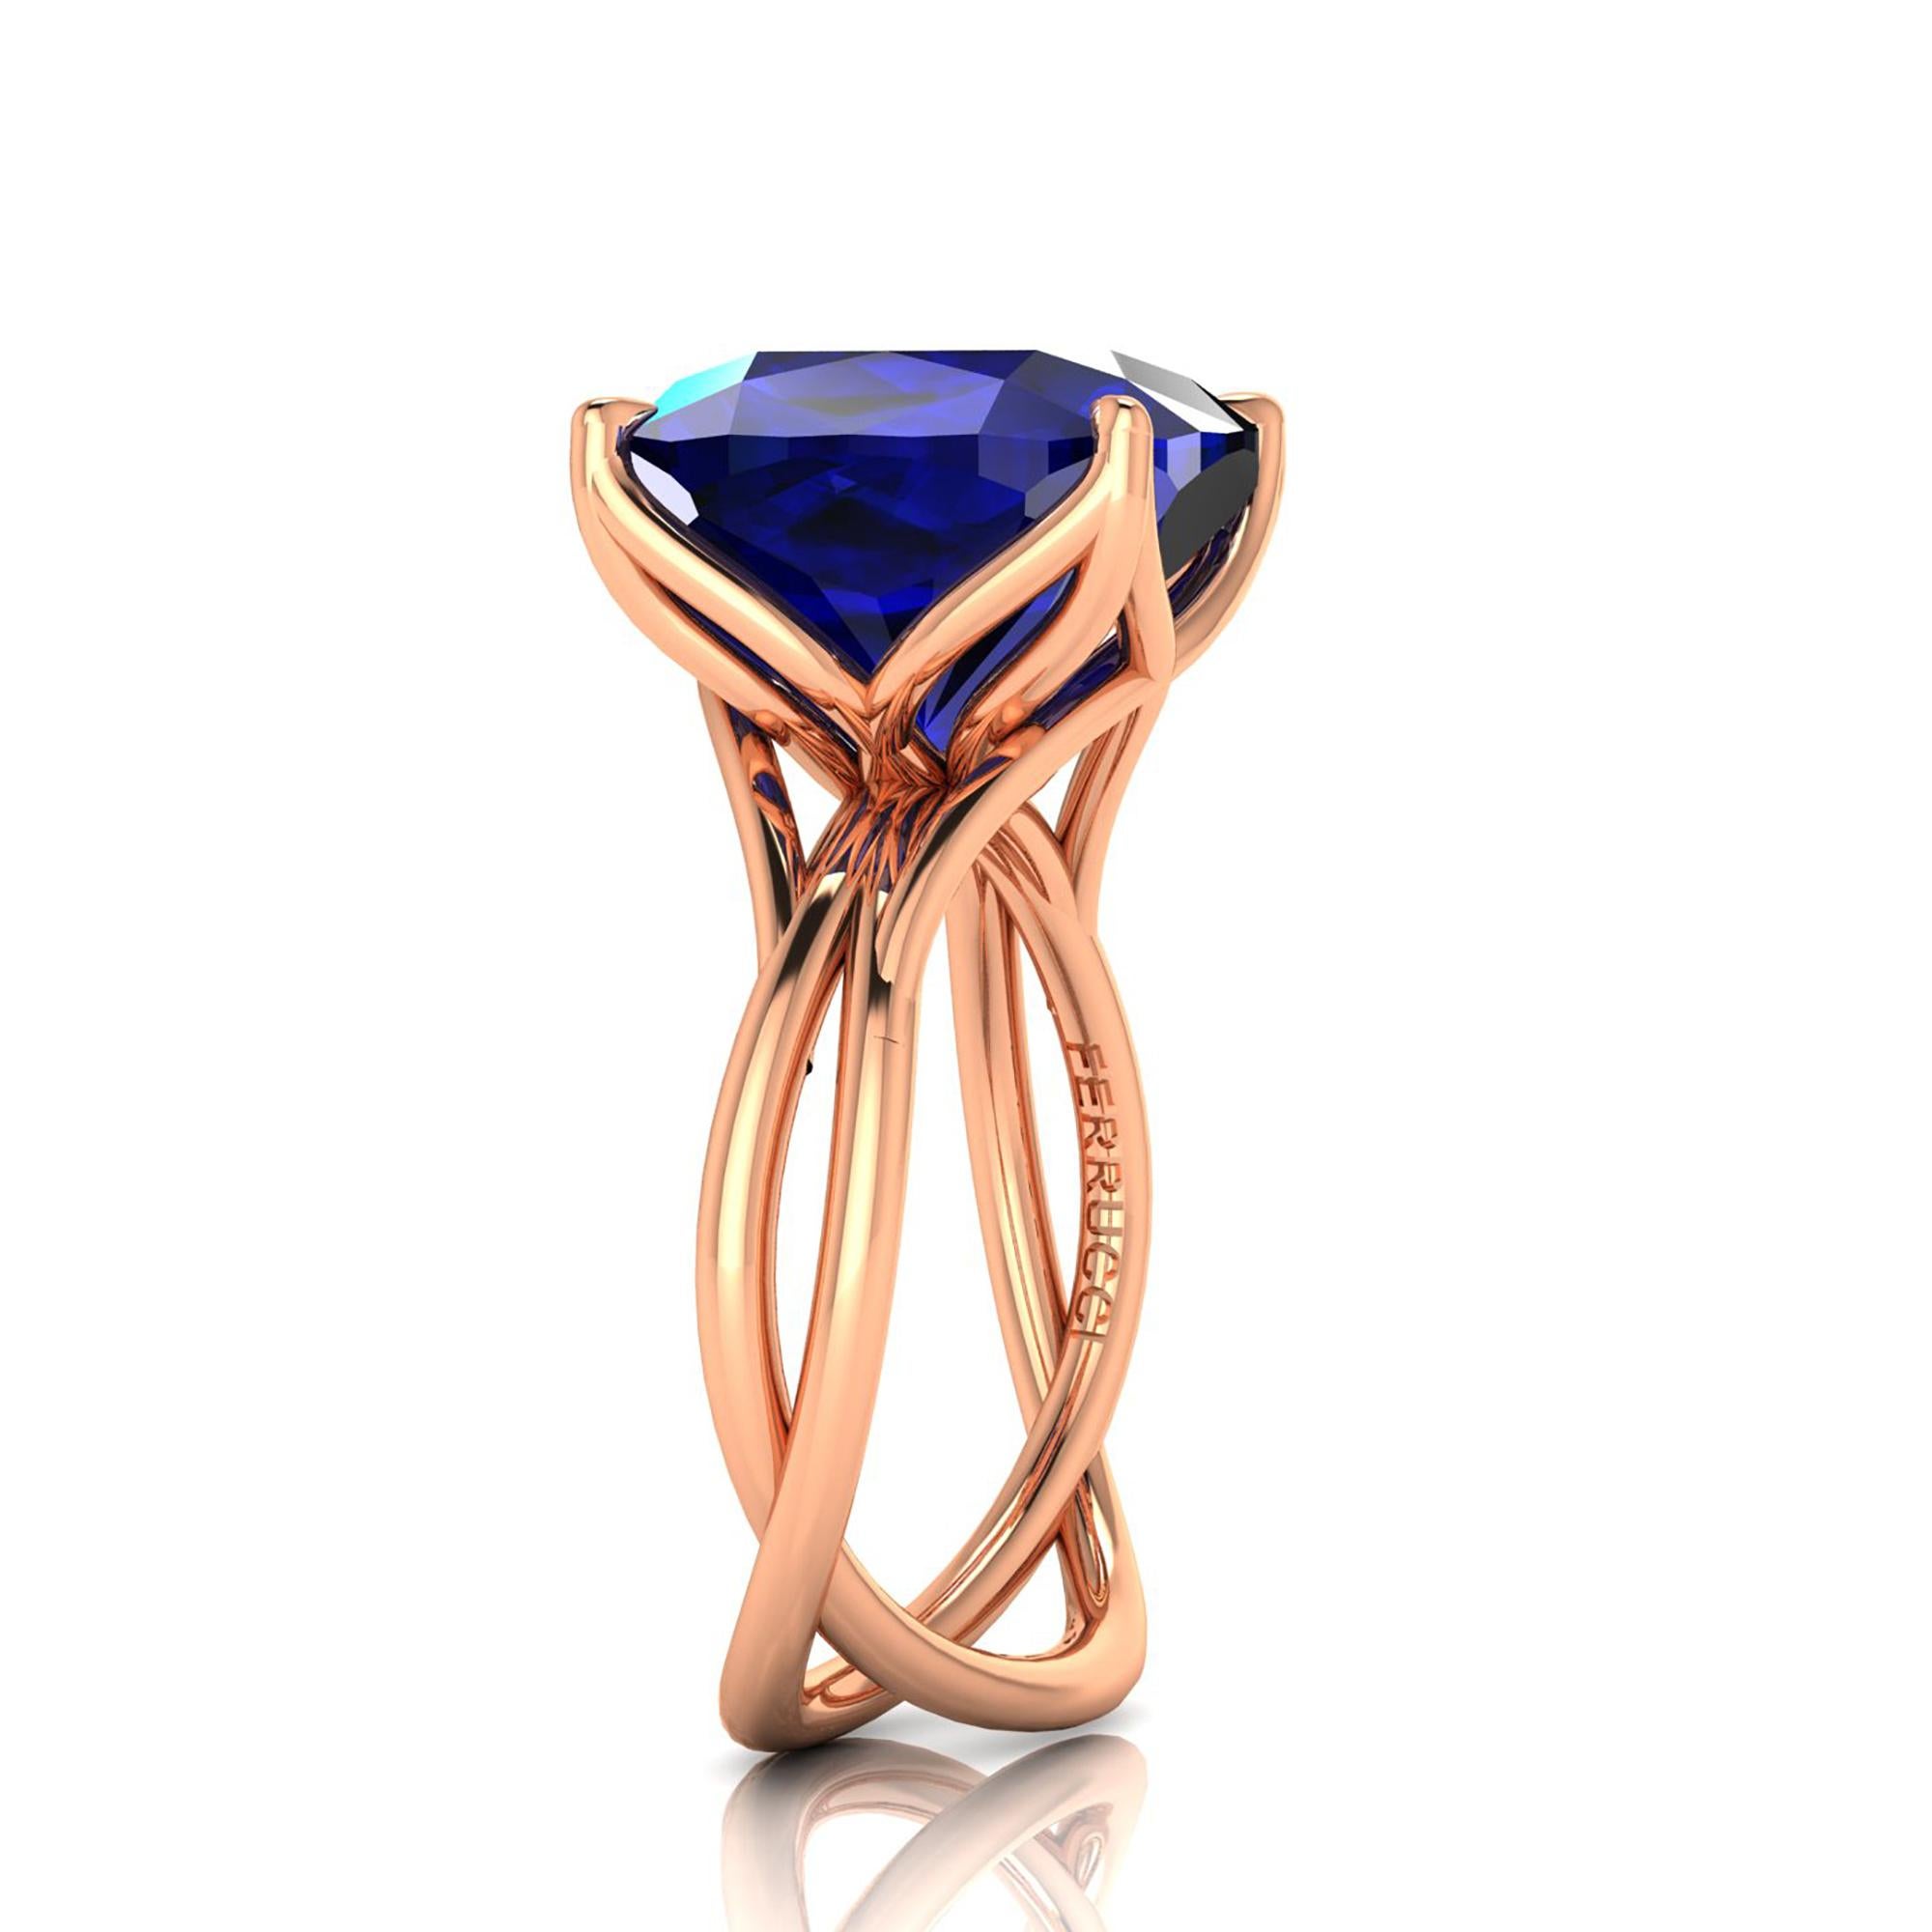 A Spectacular 9.23 carat natural Tanzanite of a deep blue and purple refractions, unique in its splendor, GIA Certified, in a one of a kind, hand made 18k rose gold ring, designed and conceived in New York City. A design that recall nature's vines